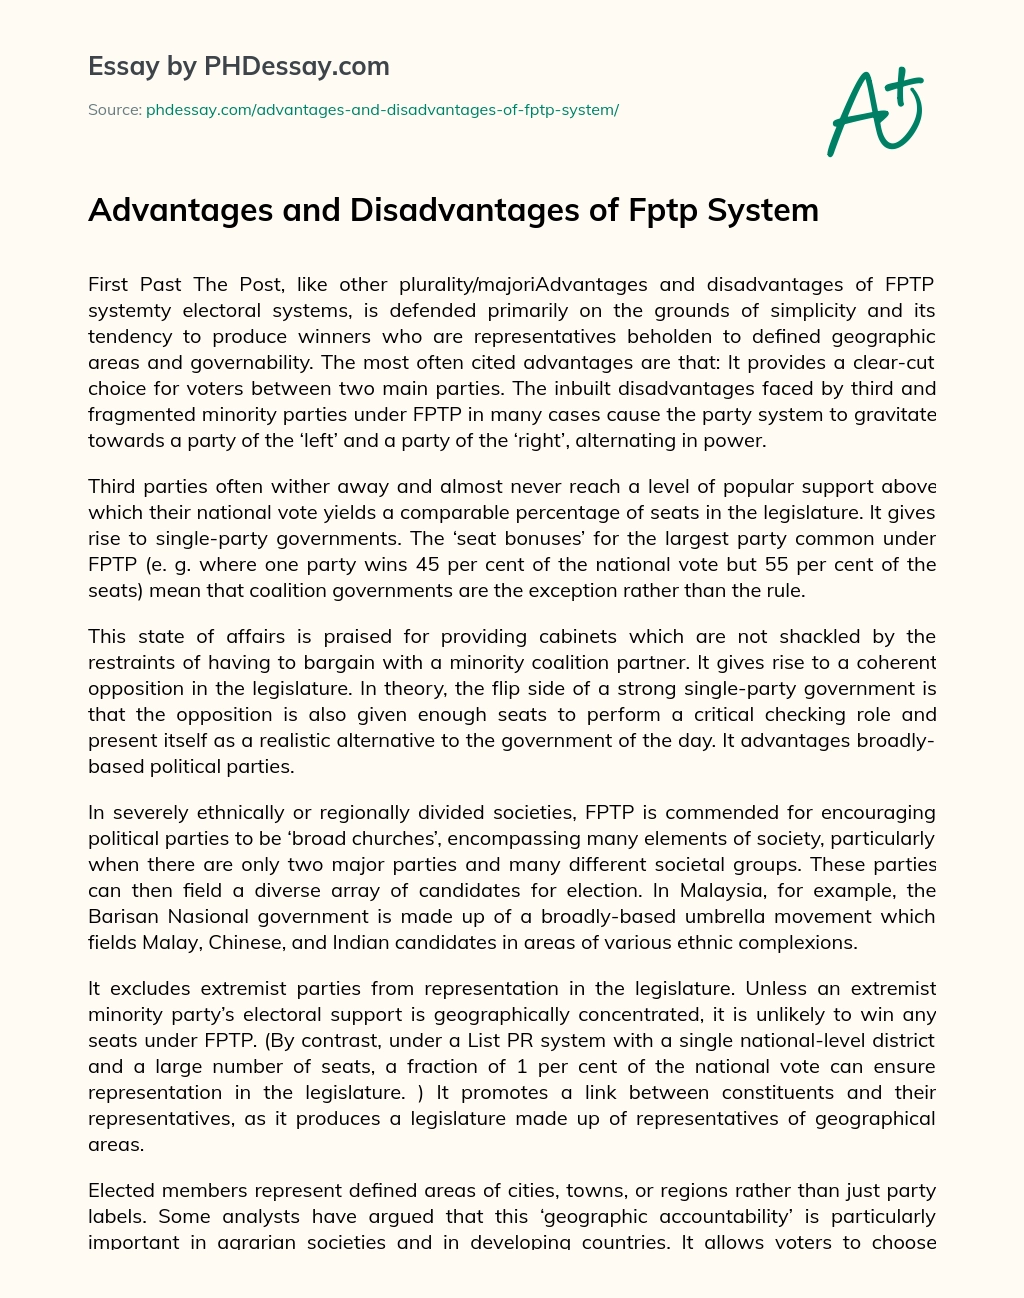 Advantages and Disadvantages of Fptp System essay